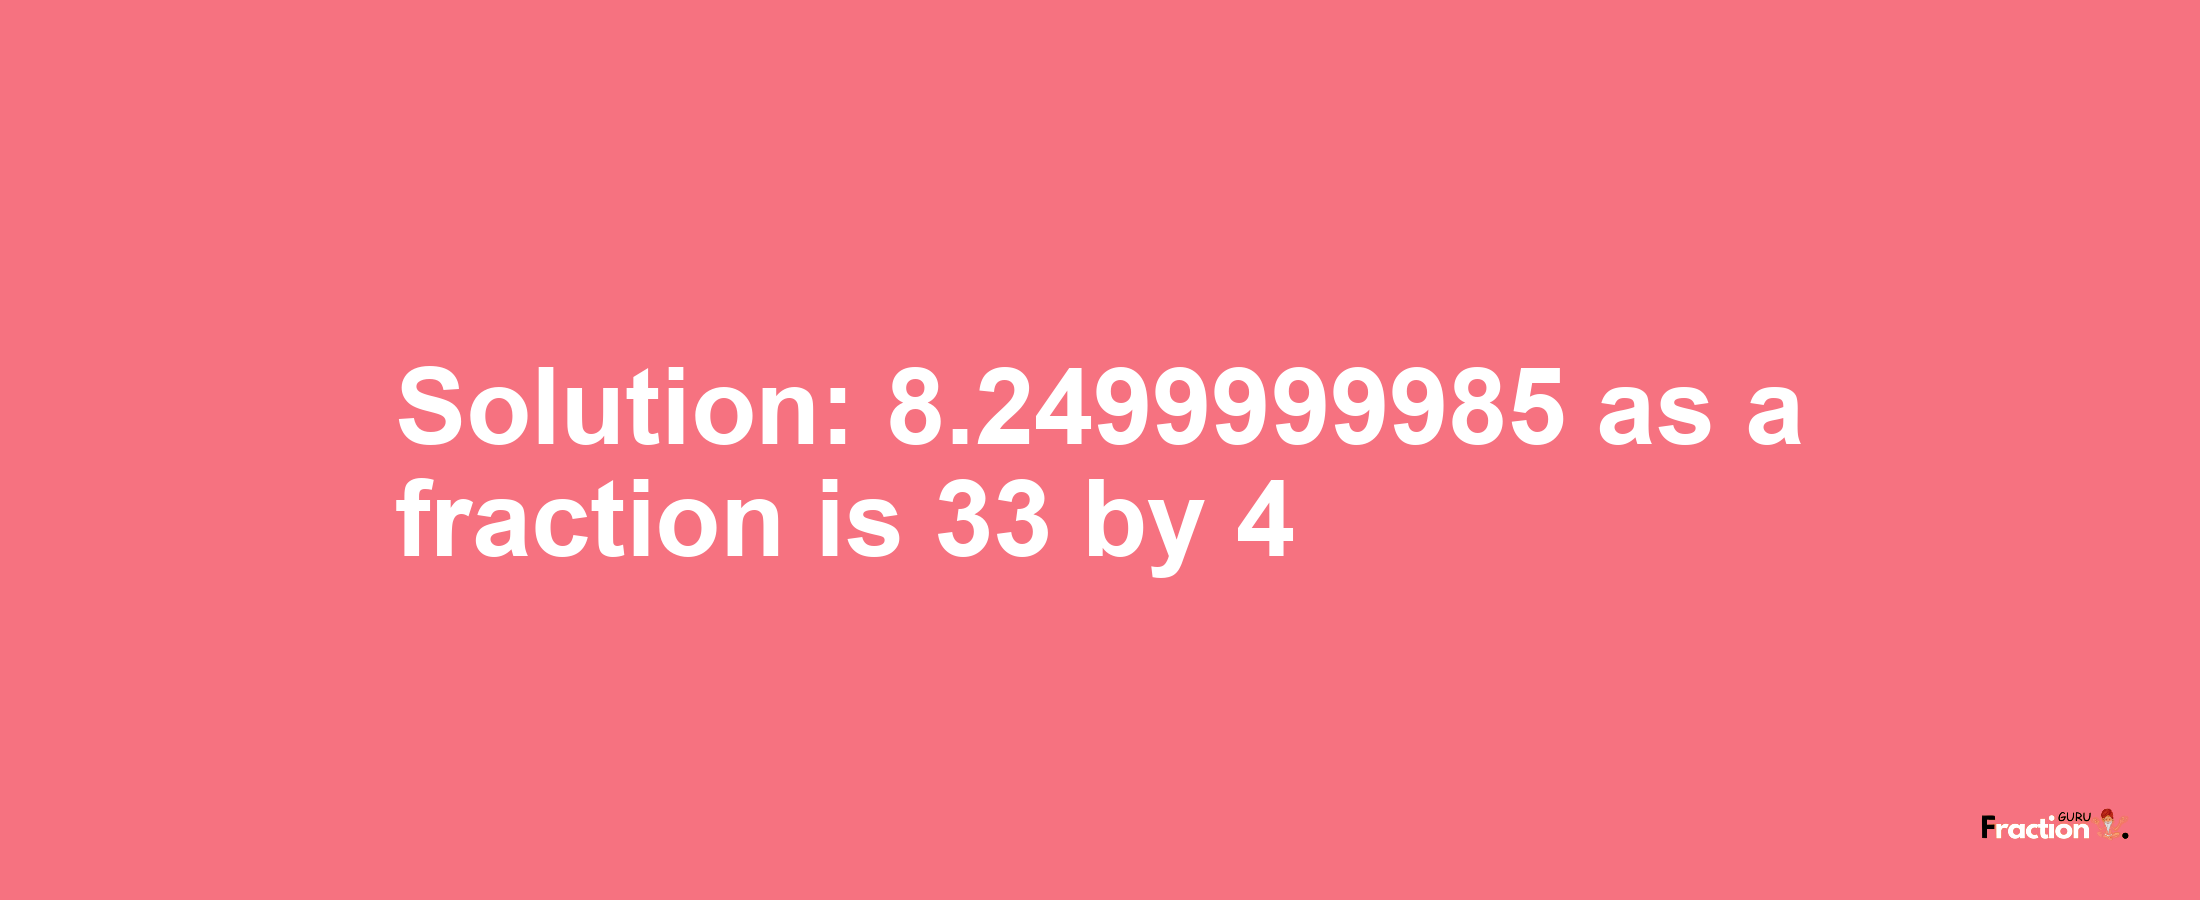 Solution:8.2499999985 as a fraction is 33/4